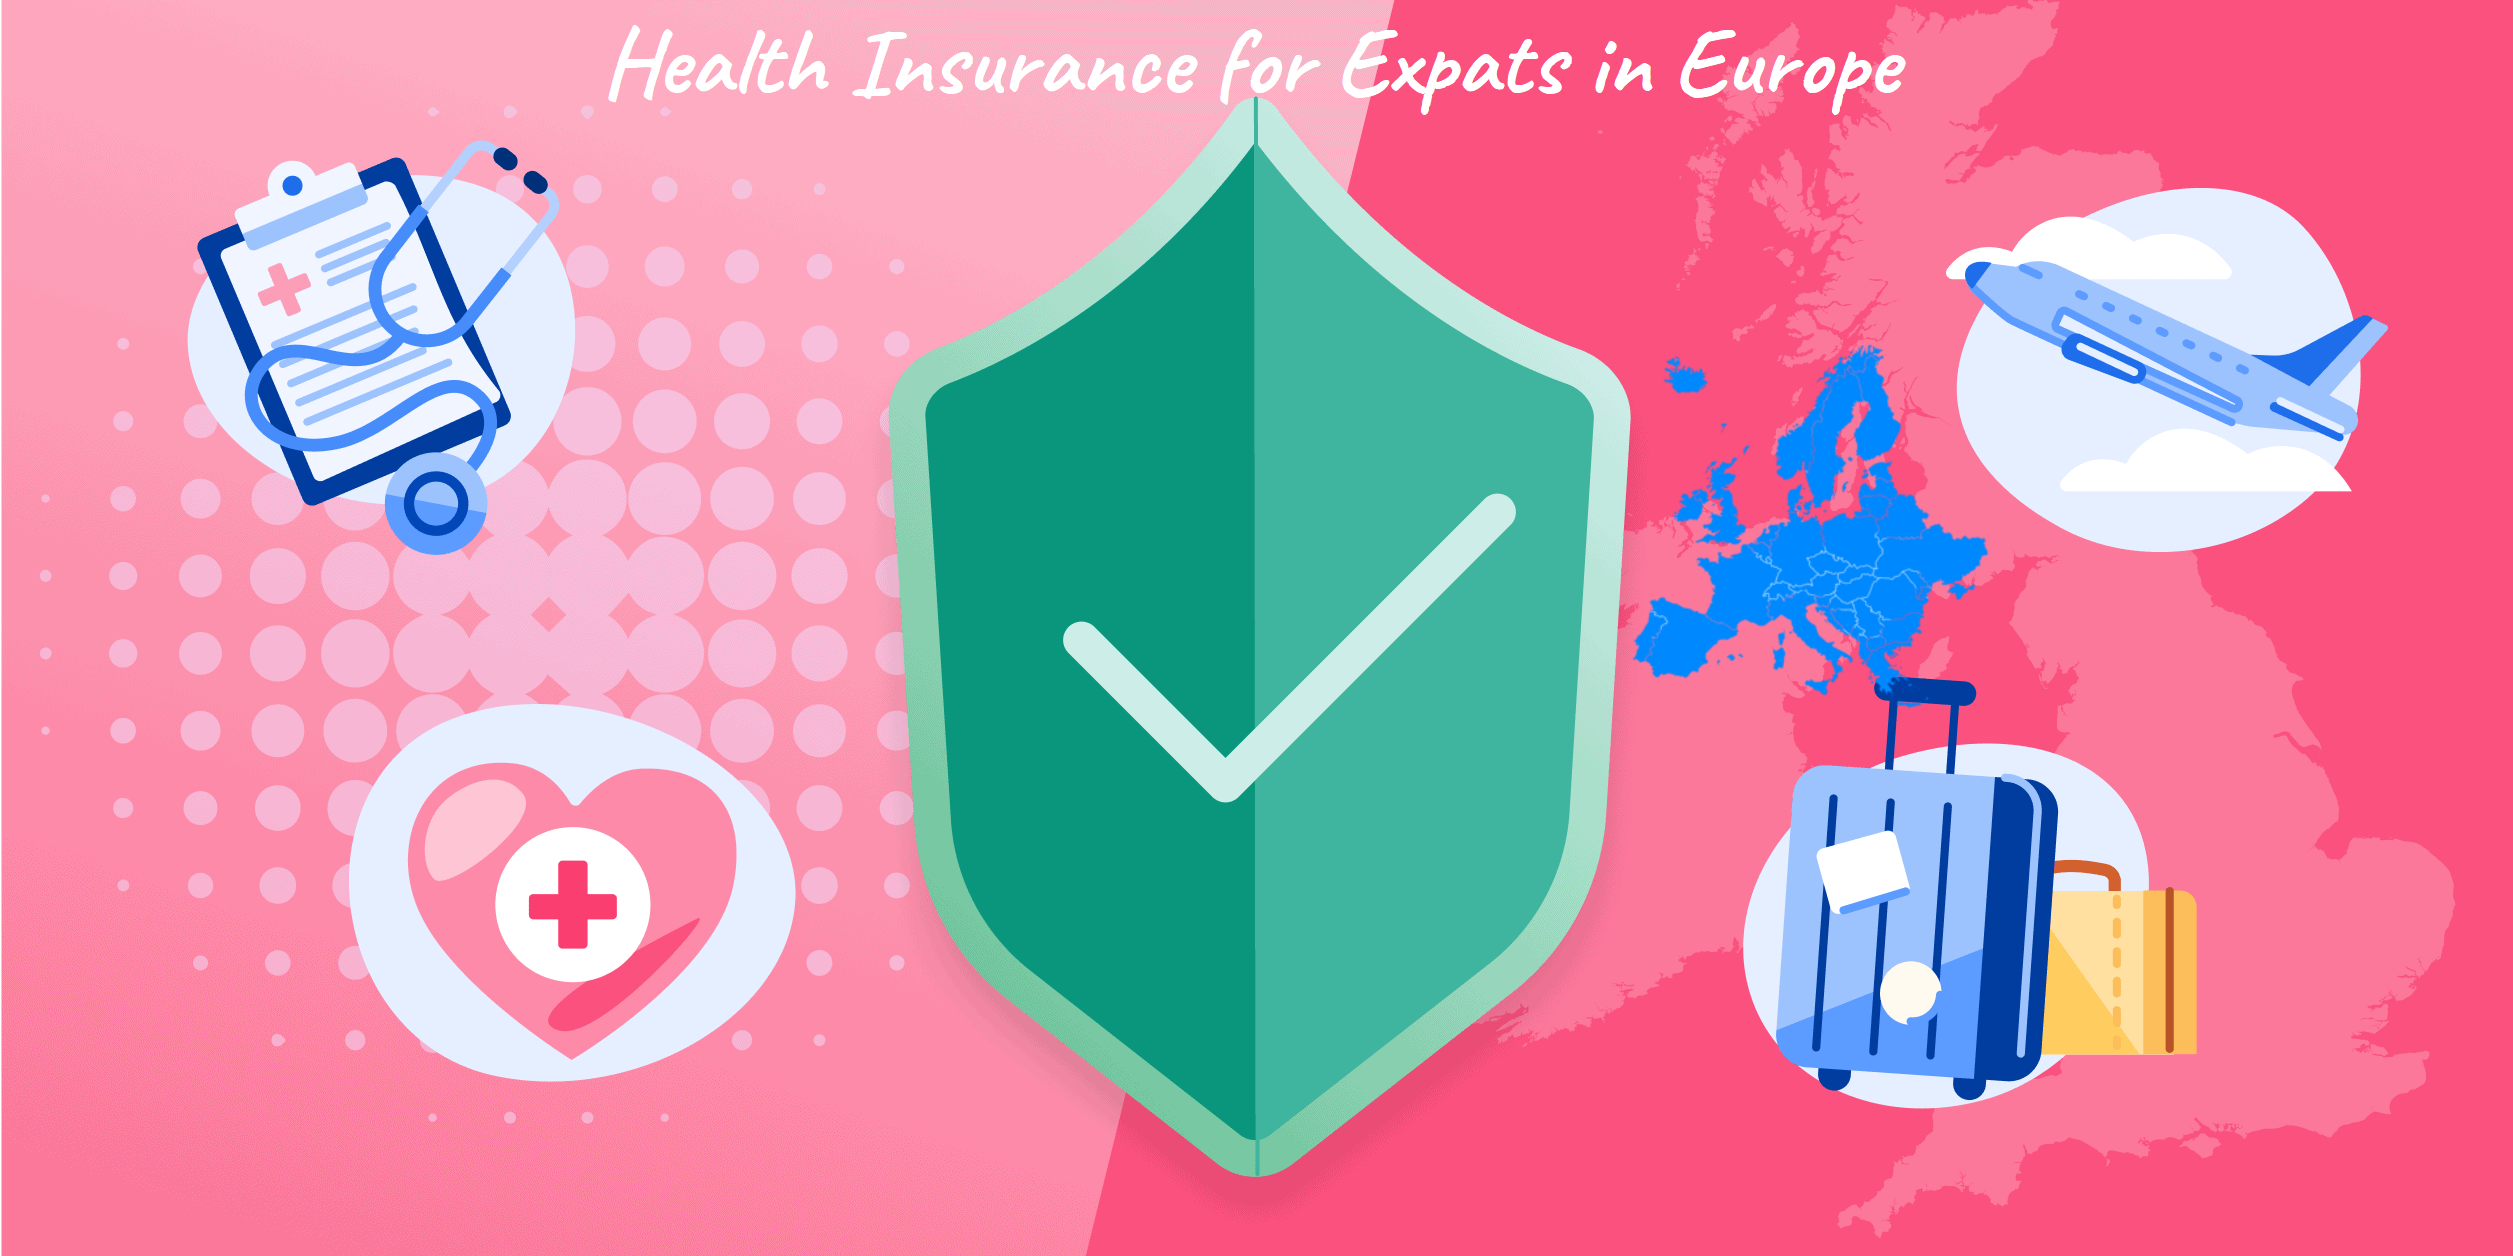 Health Insurance for Expats in Europe